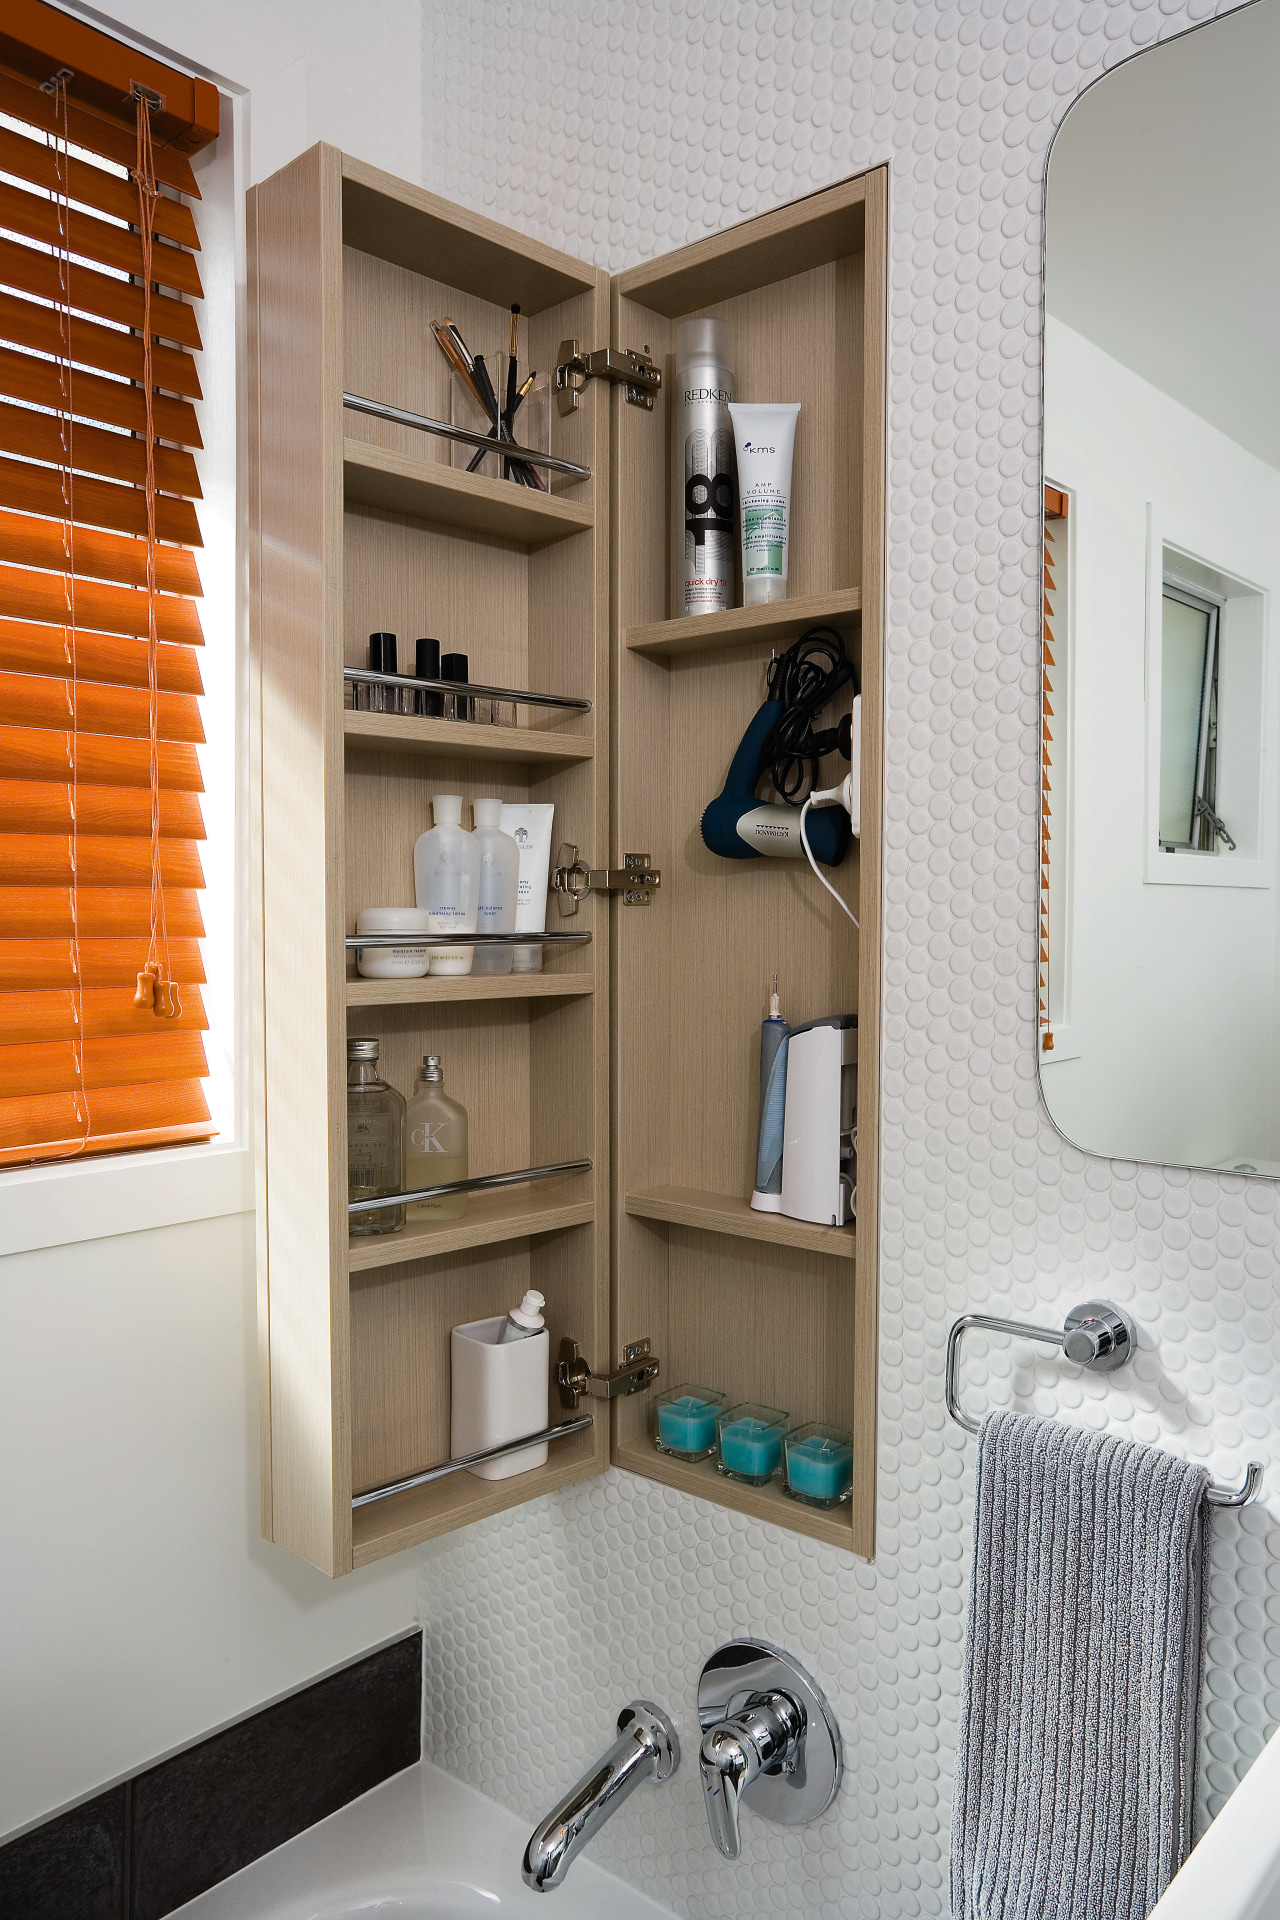 A view of a bathroom designed by Yellowfox. bathroom, bathroom accessory, bathroom cabinet, bookcase, cabinetry, furniture, interior design, product design, room, shelf, shelving, gray, brown